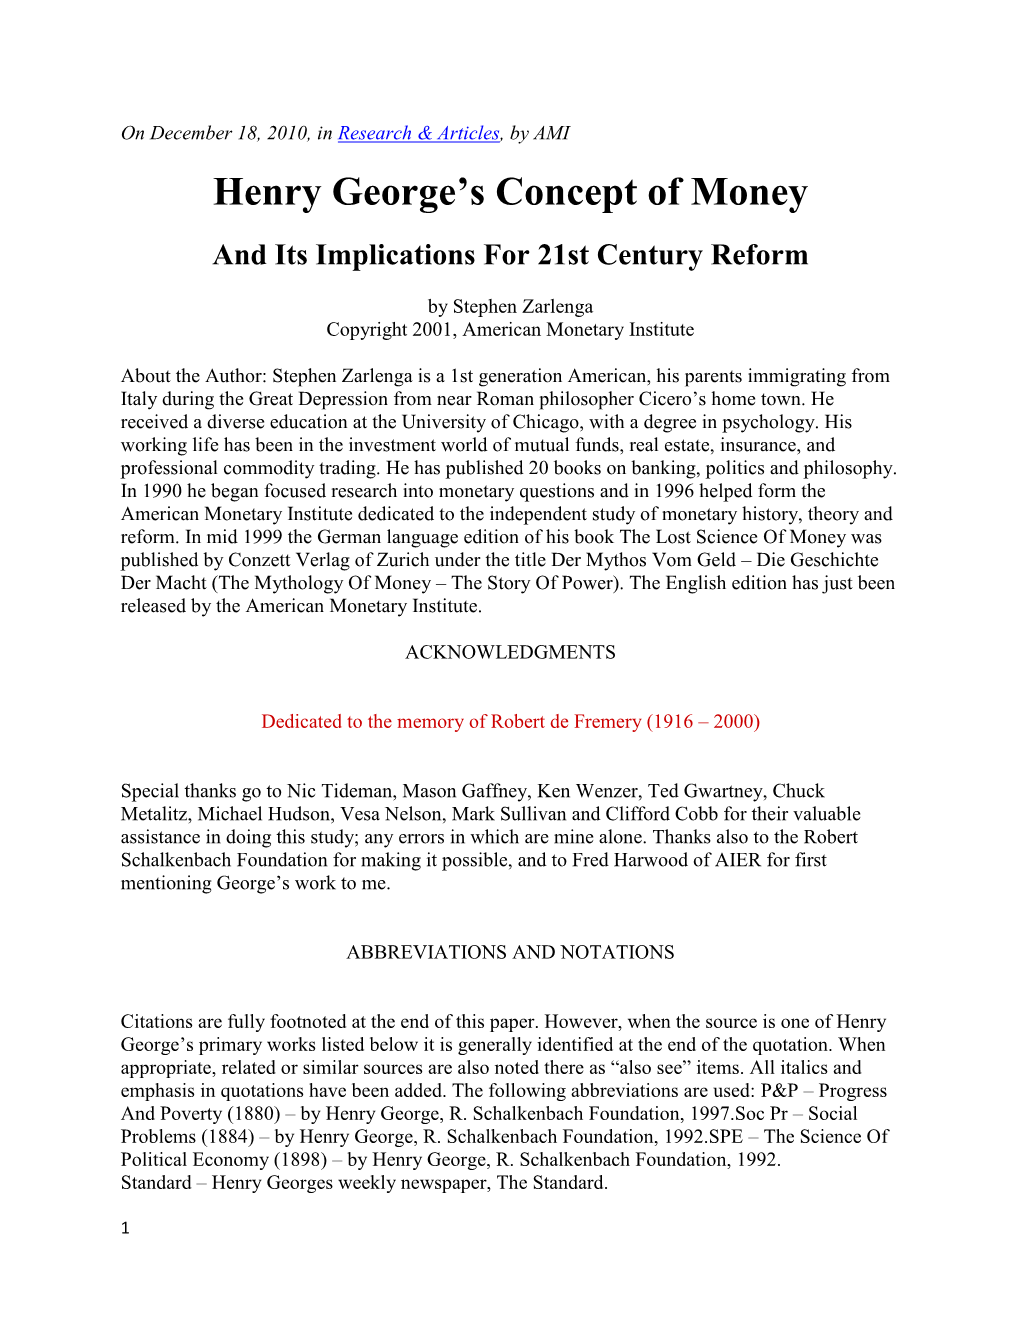 Henry George's Concept of Money